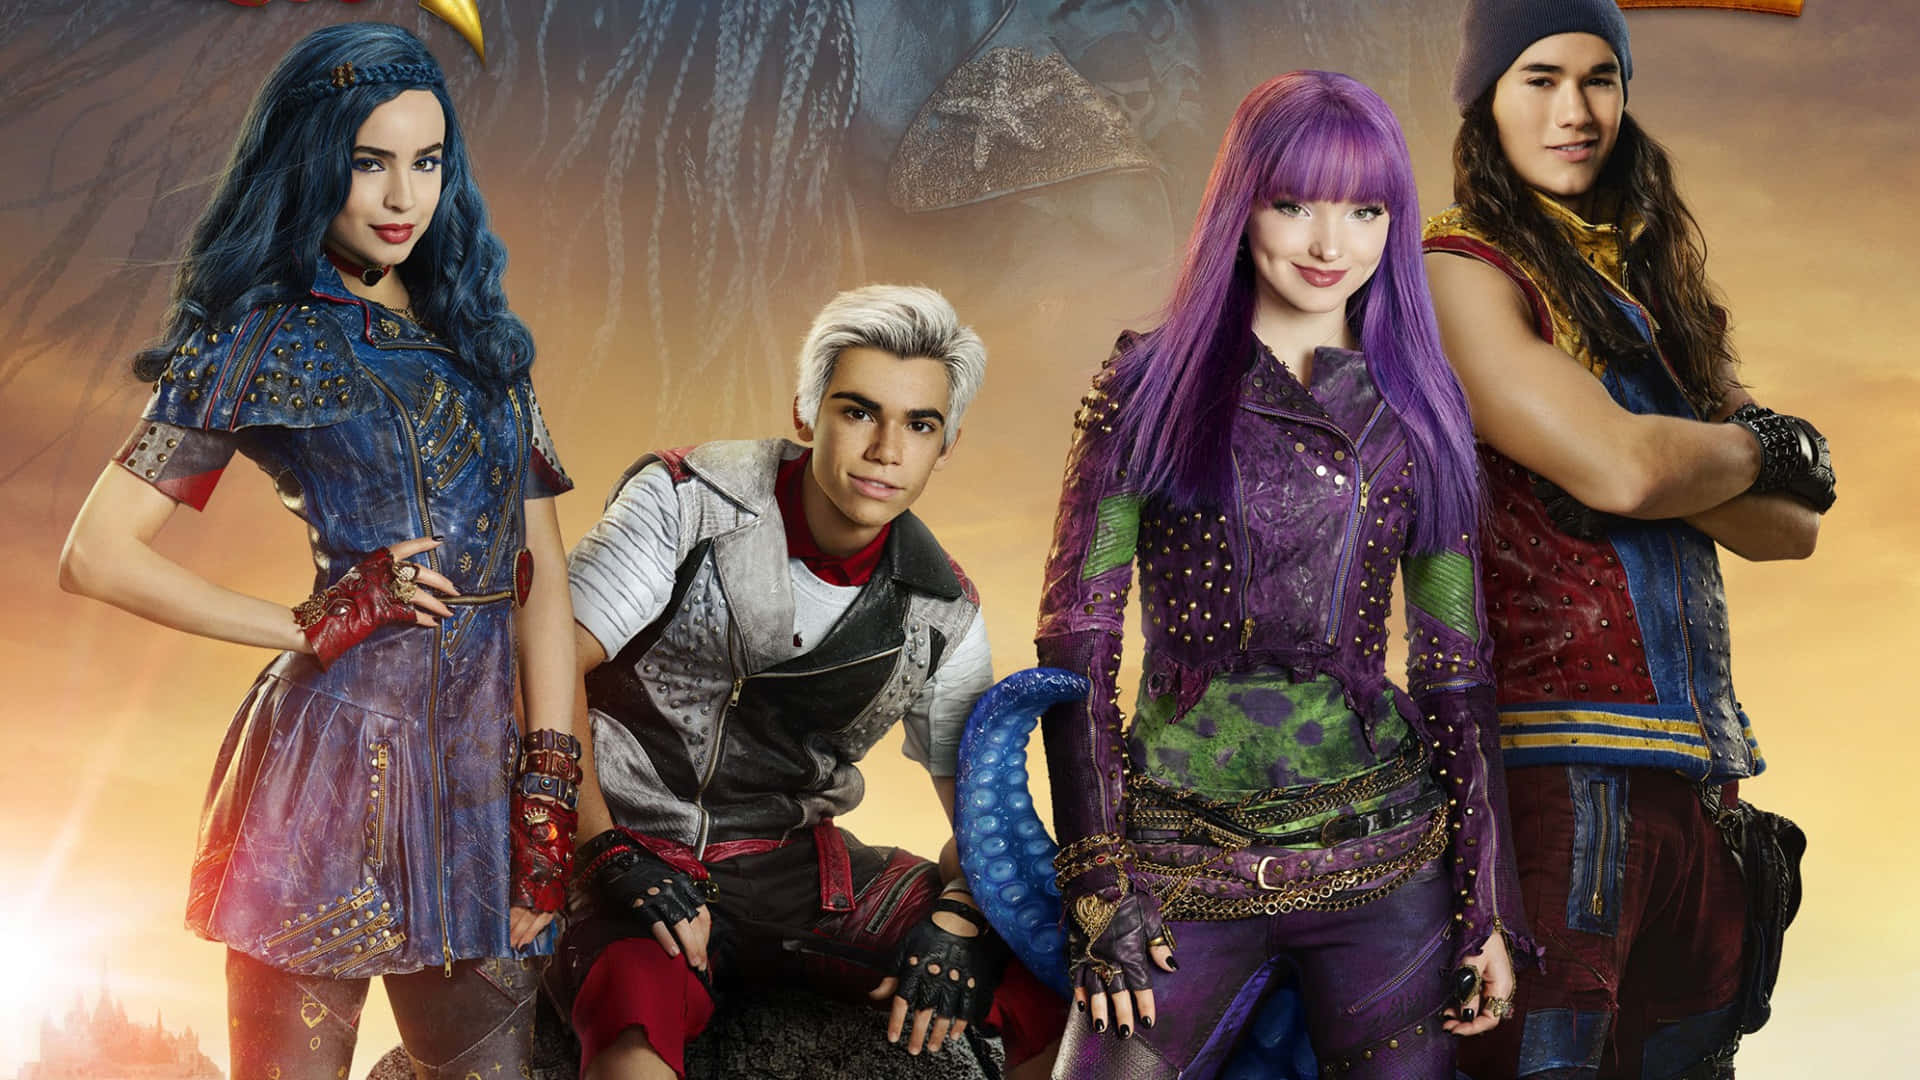 Descendants movie cast posing together in a visually striking background